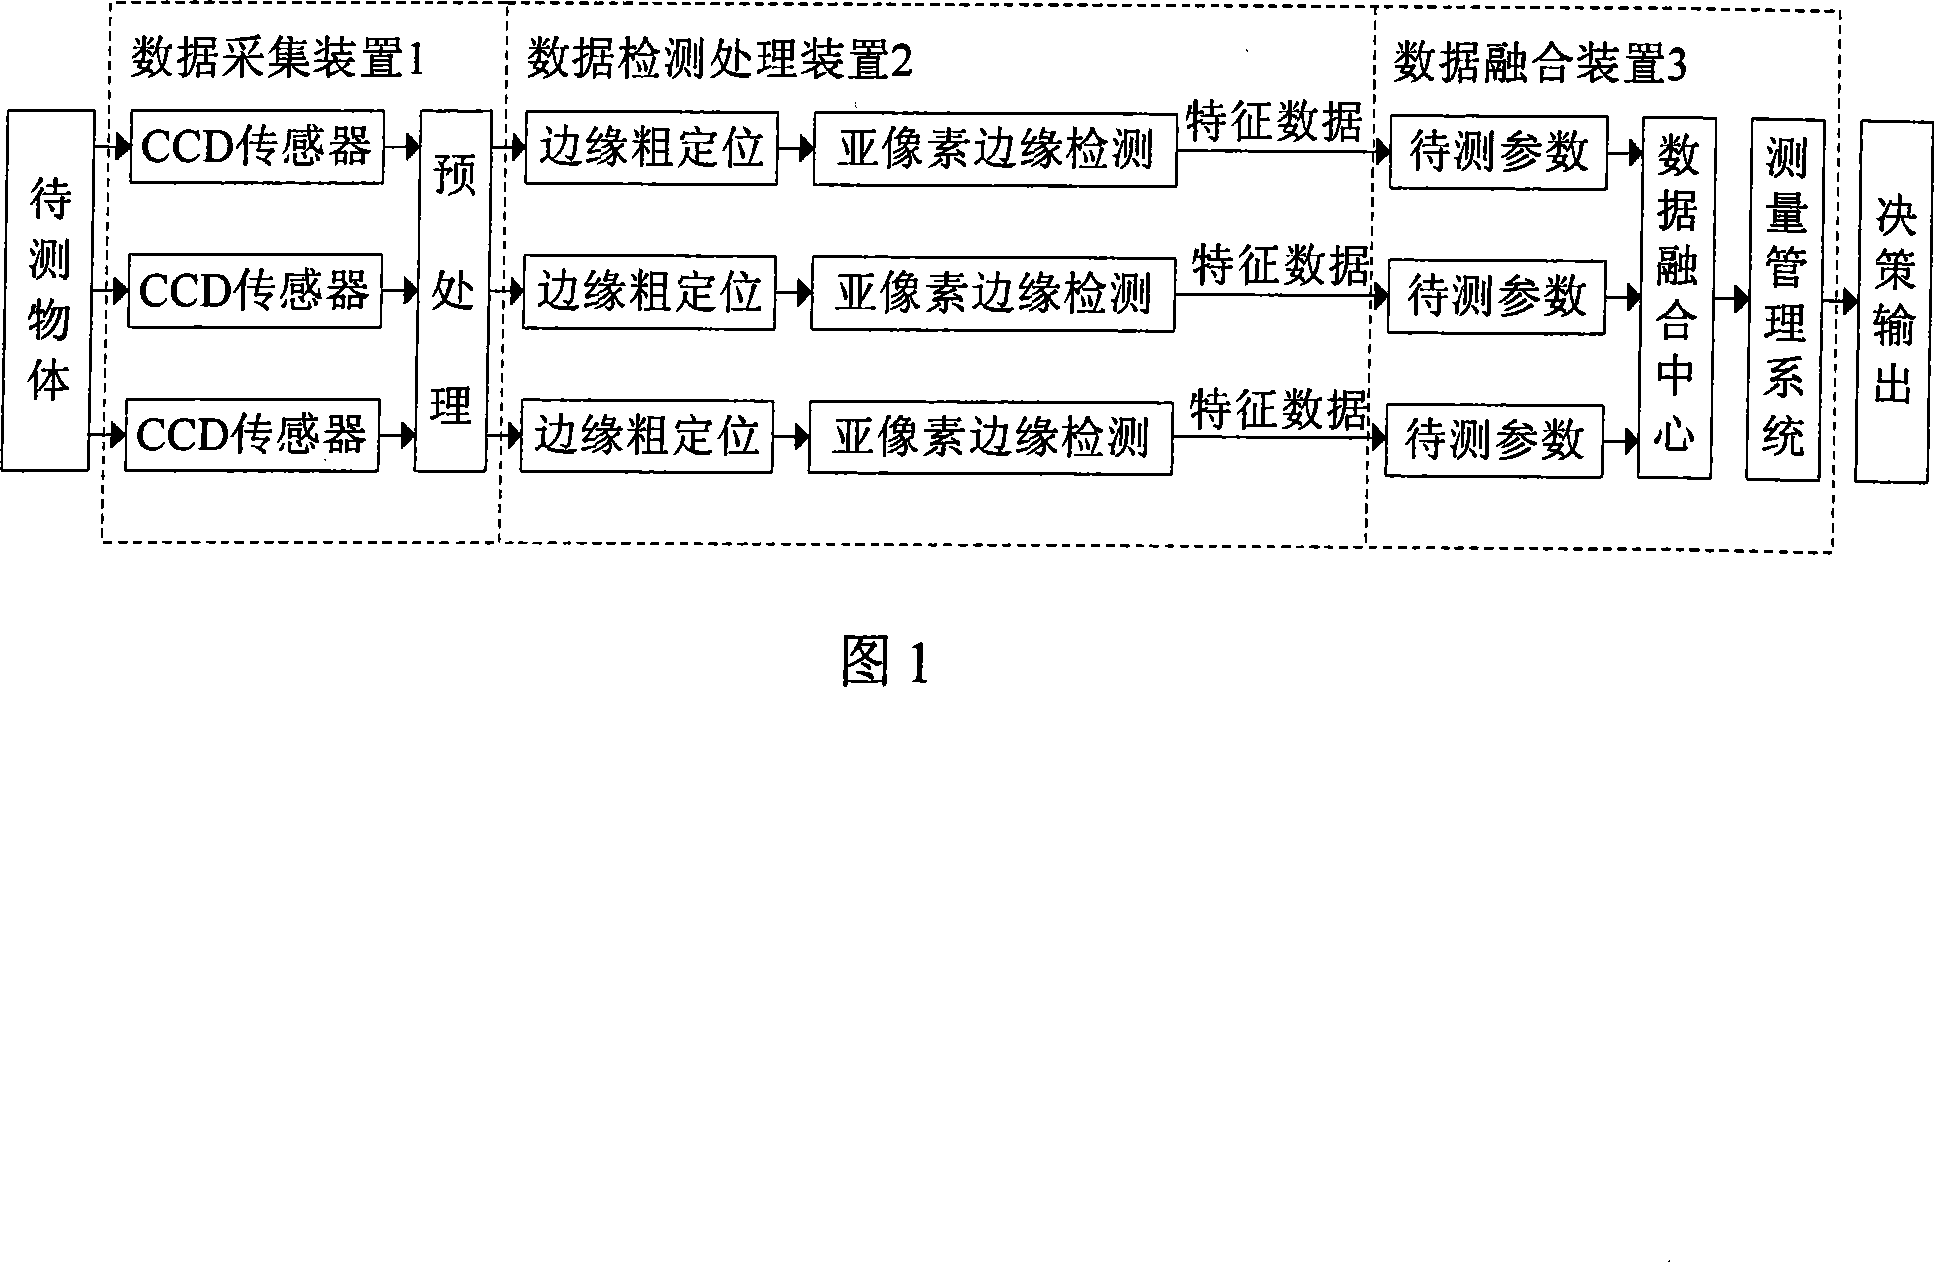 Article geometrical size measuring device and method based on multi-source image fusion